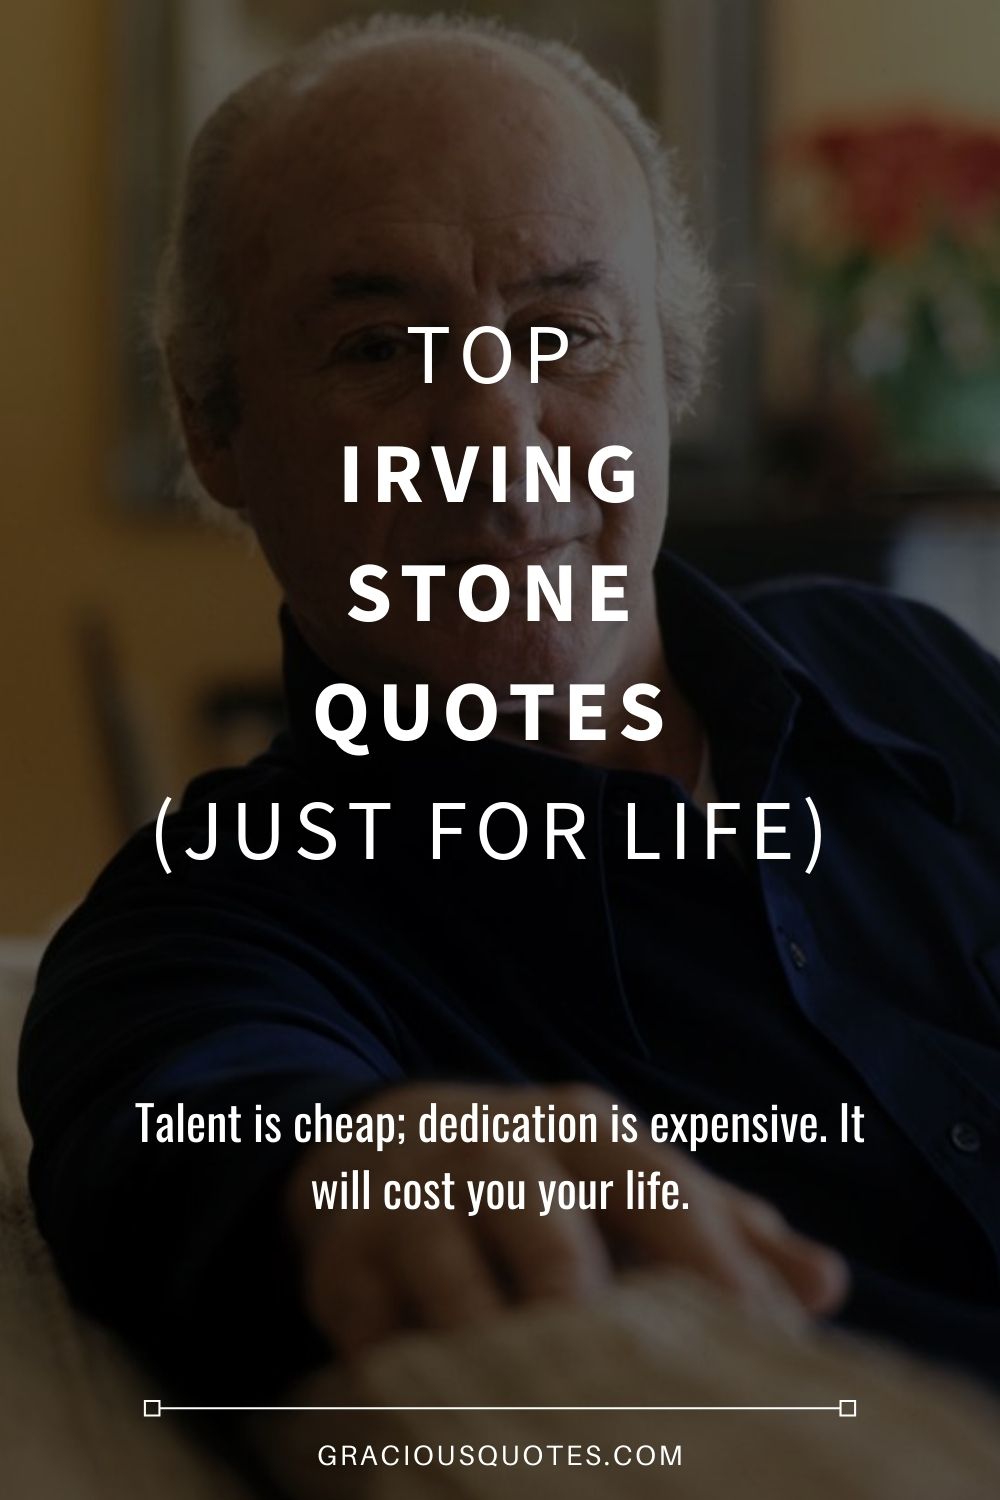 Top Irving Stone Quotes (JUST FOR LIFE) - Gracious Quotes